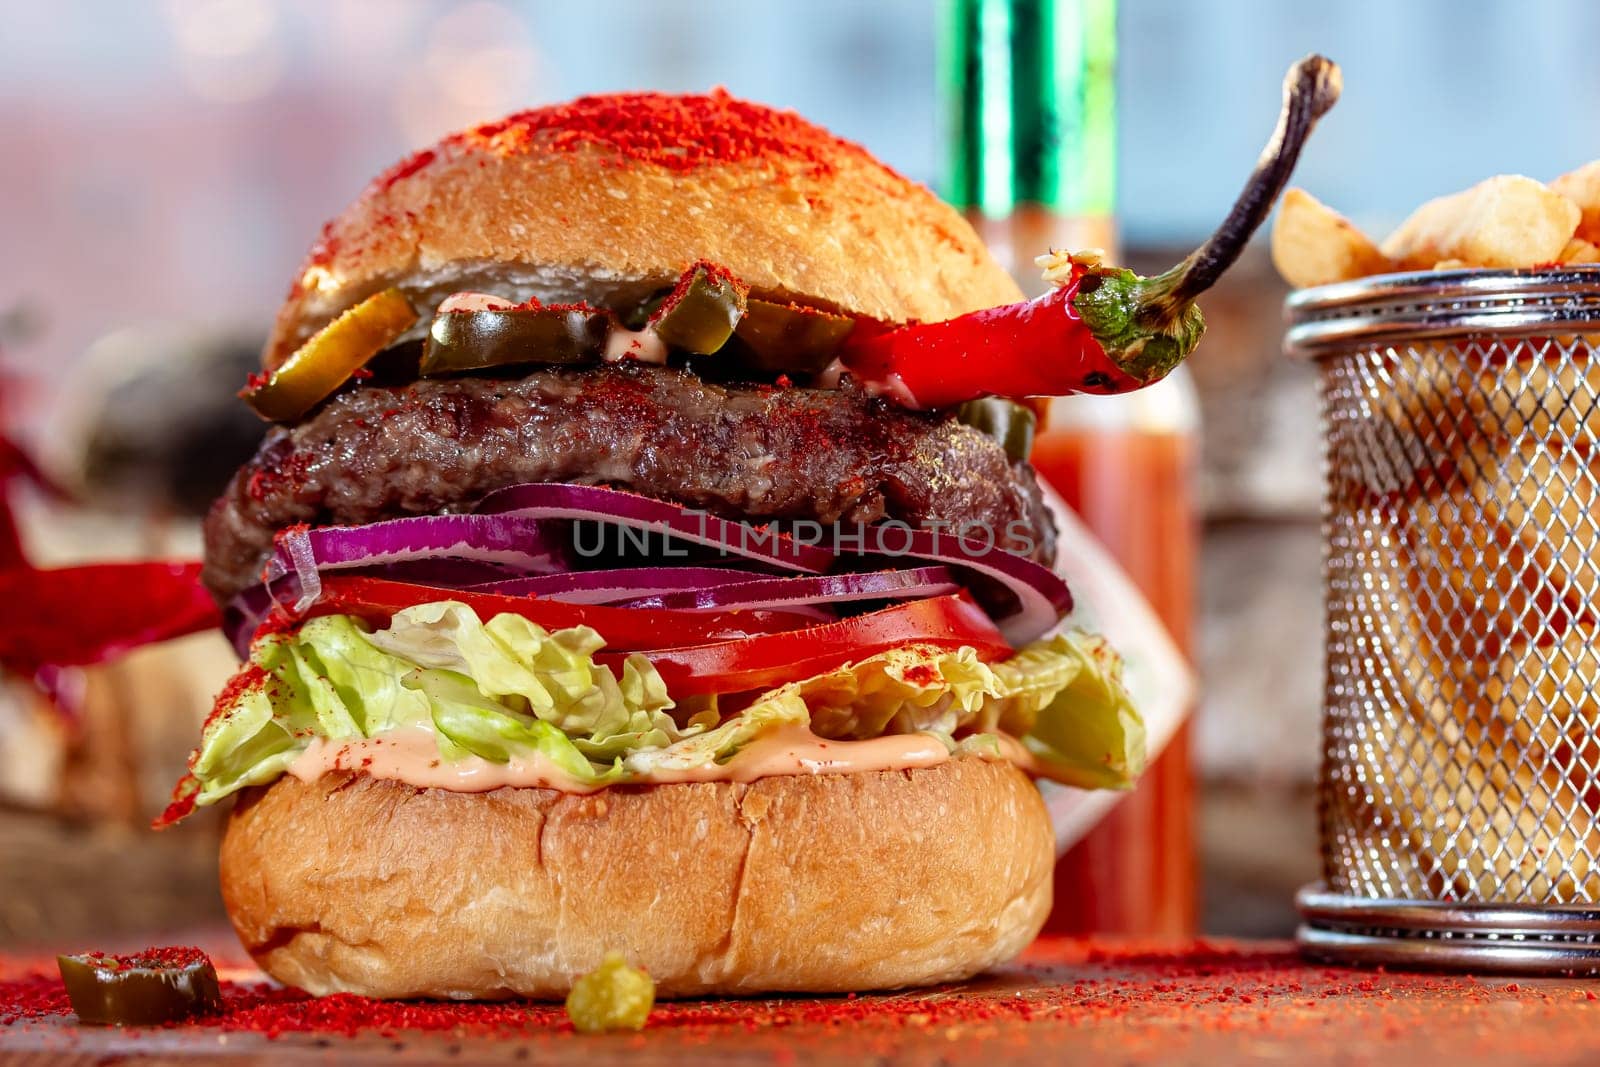 Hot chilli pepper cheeseburger with spicy chili sauce, a beef patty and melted cheese served with a side dish of crispy French Fries on a wooden board in rustic restaurant by Milanchikov